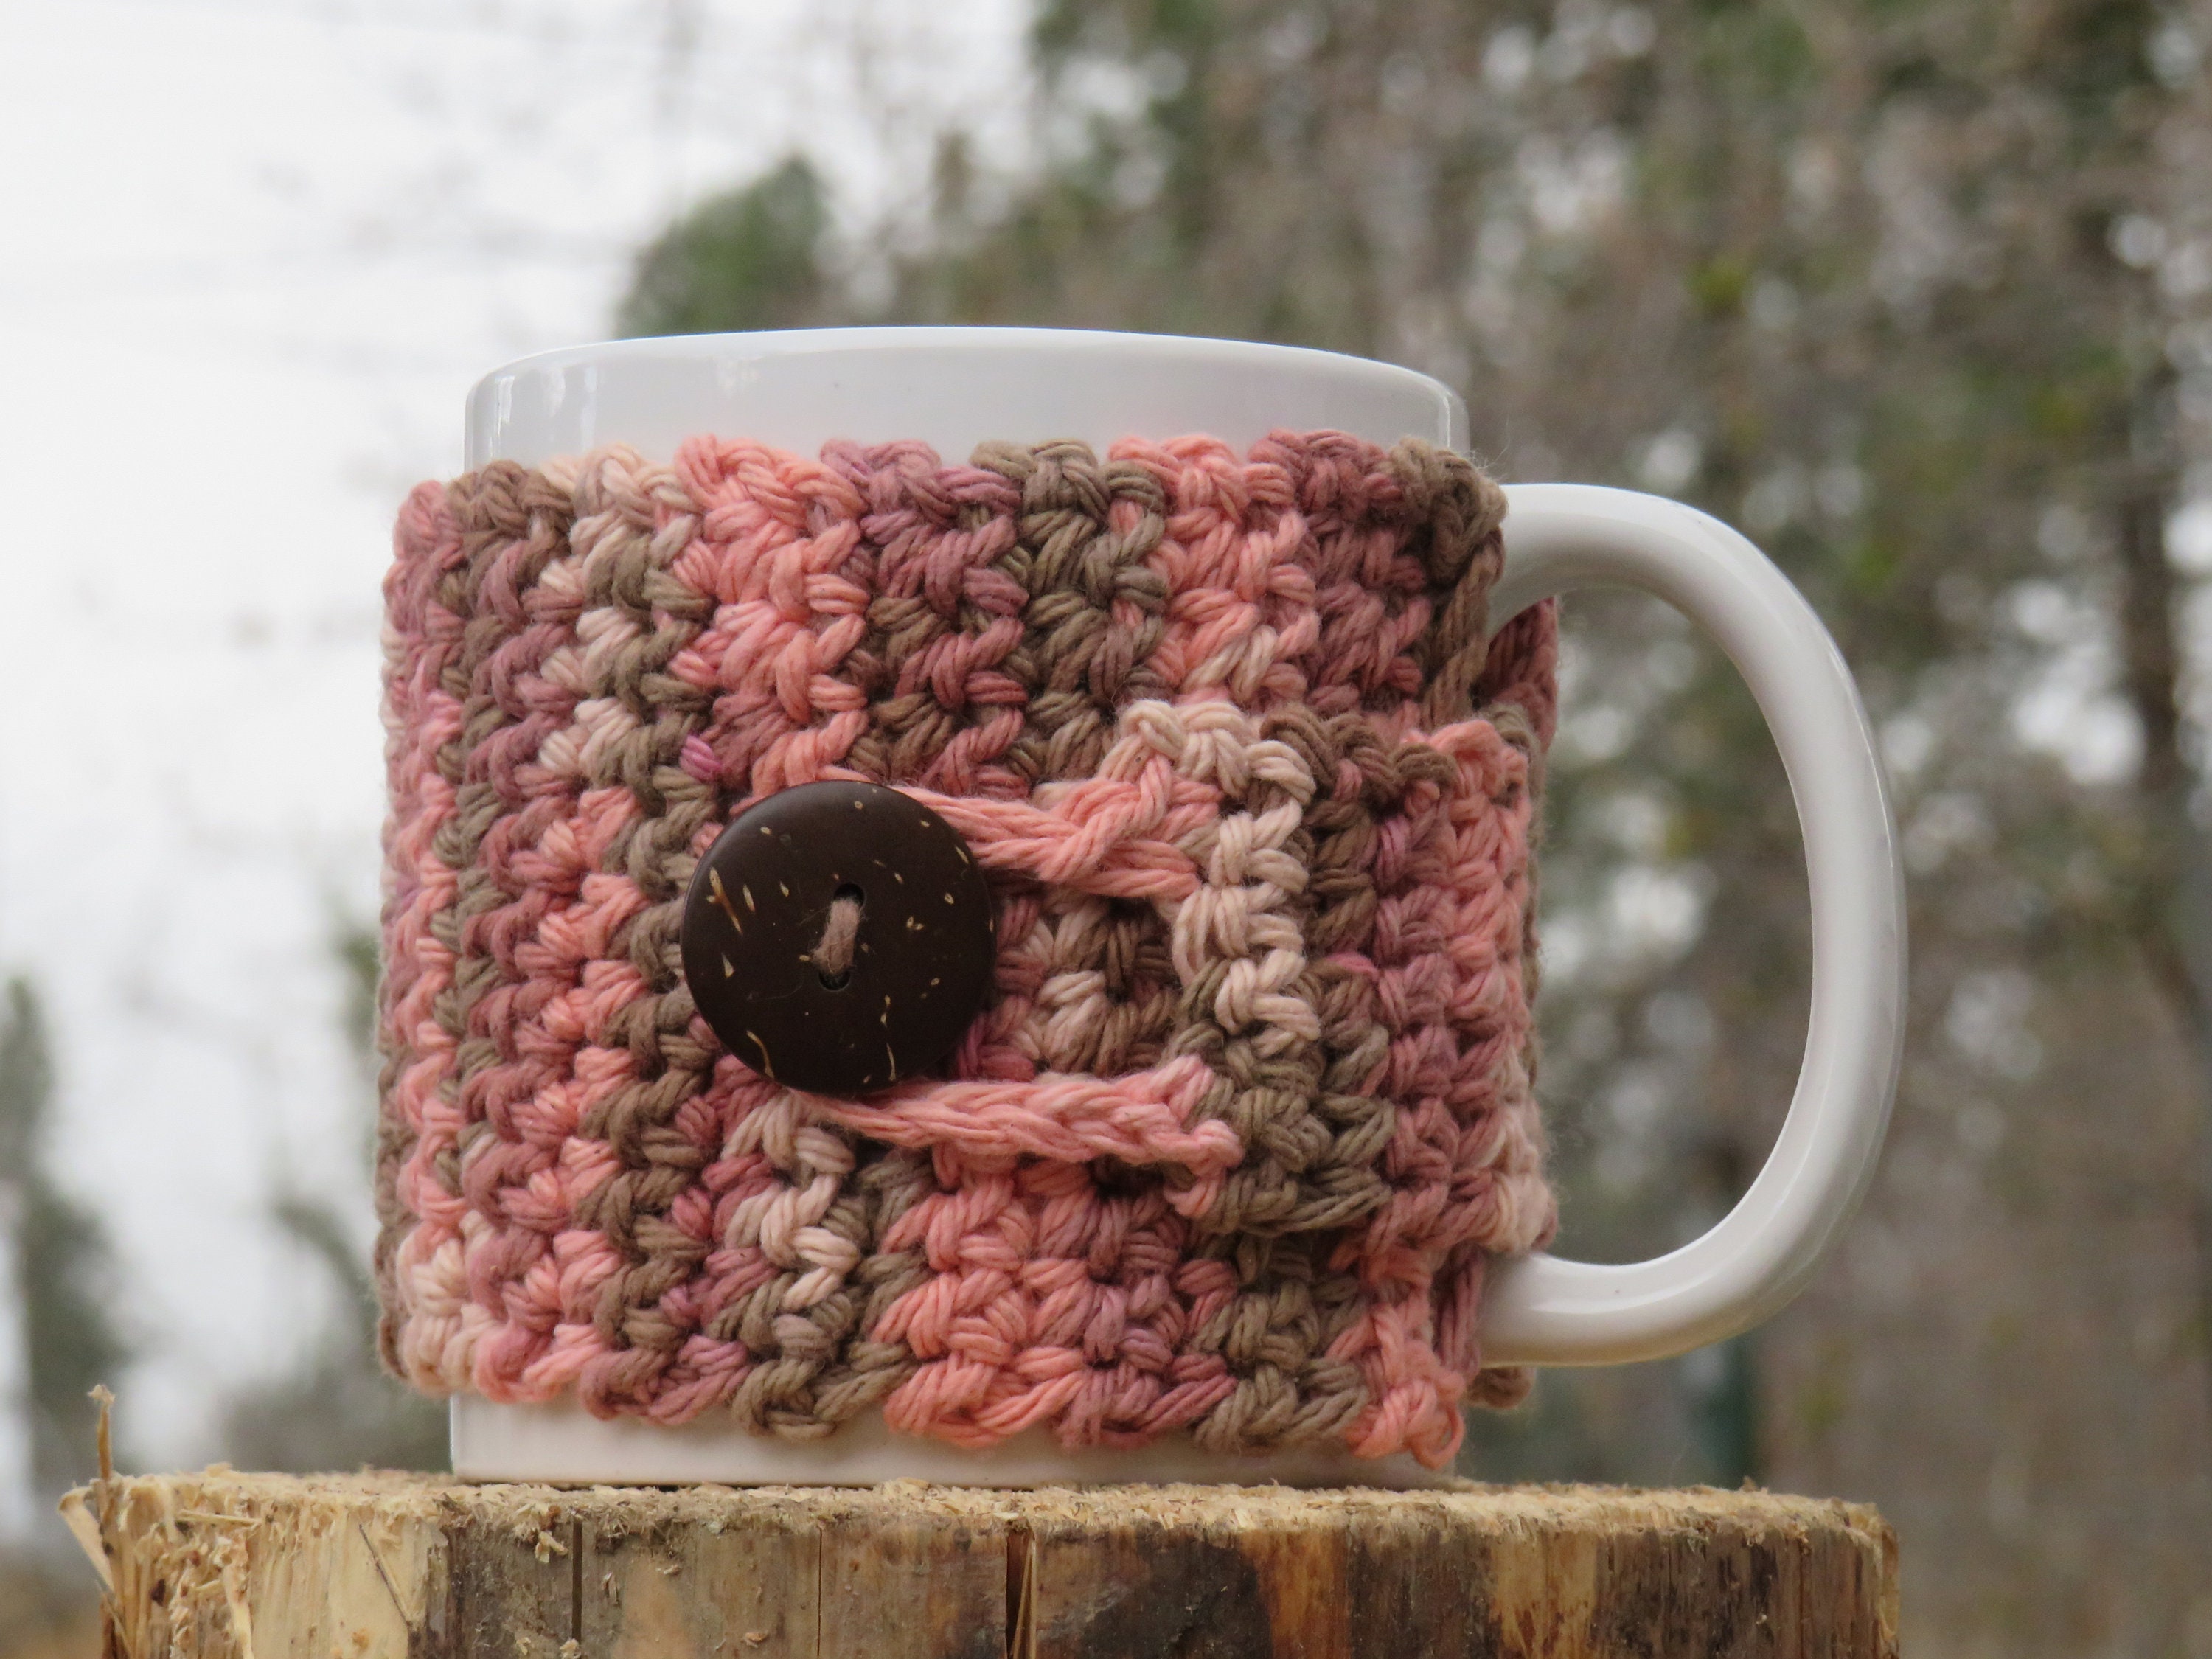 French Press Cozy Cafetiere Cosy Hand Knitted With Field of Sheep